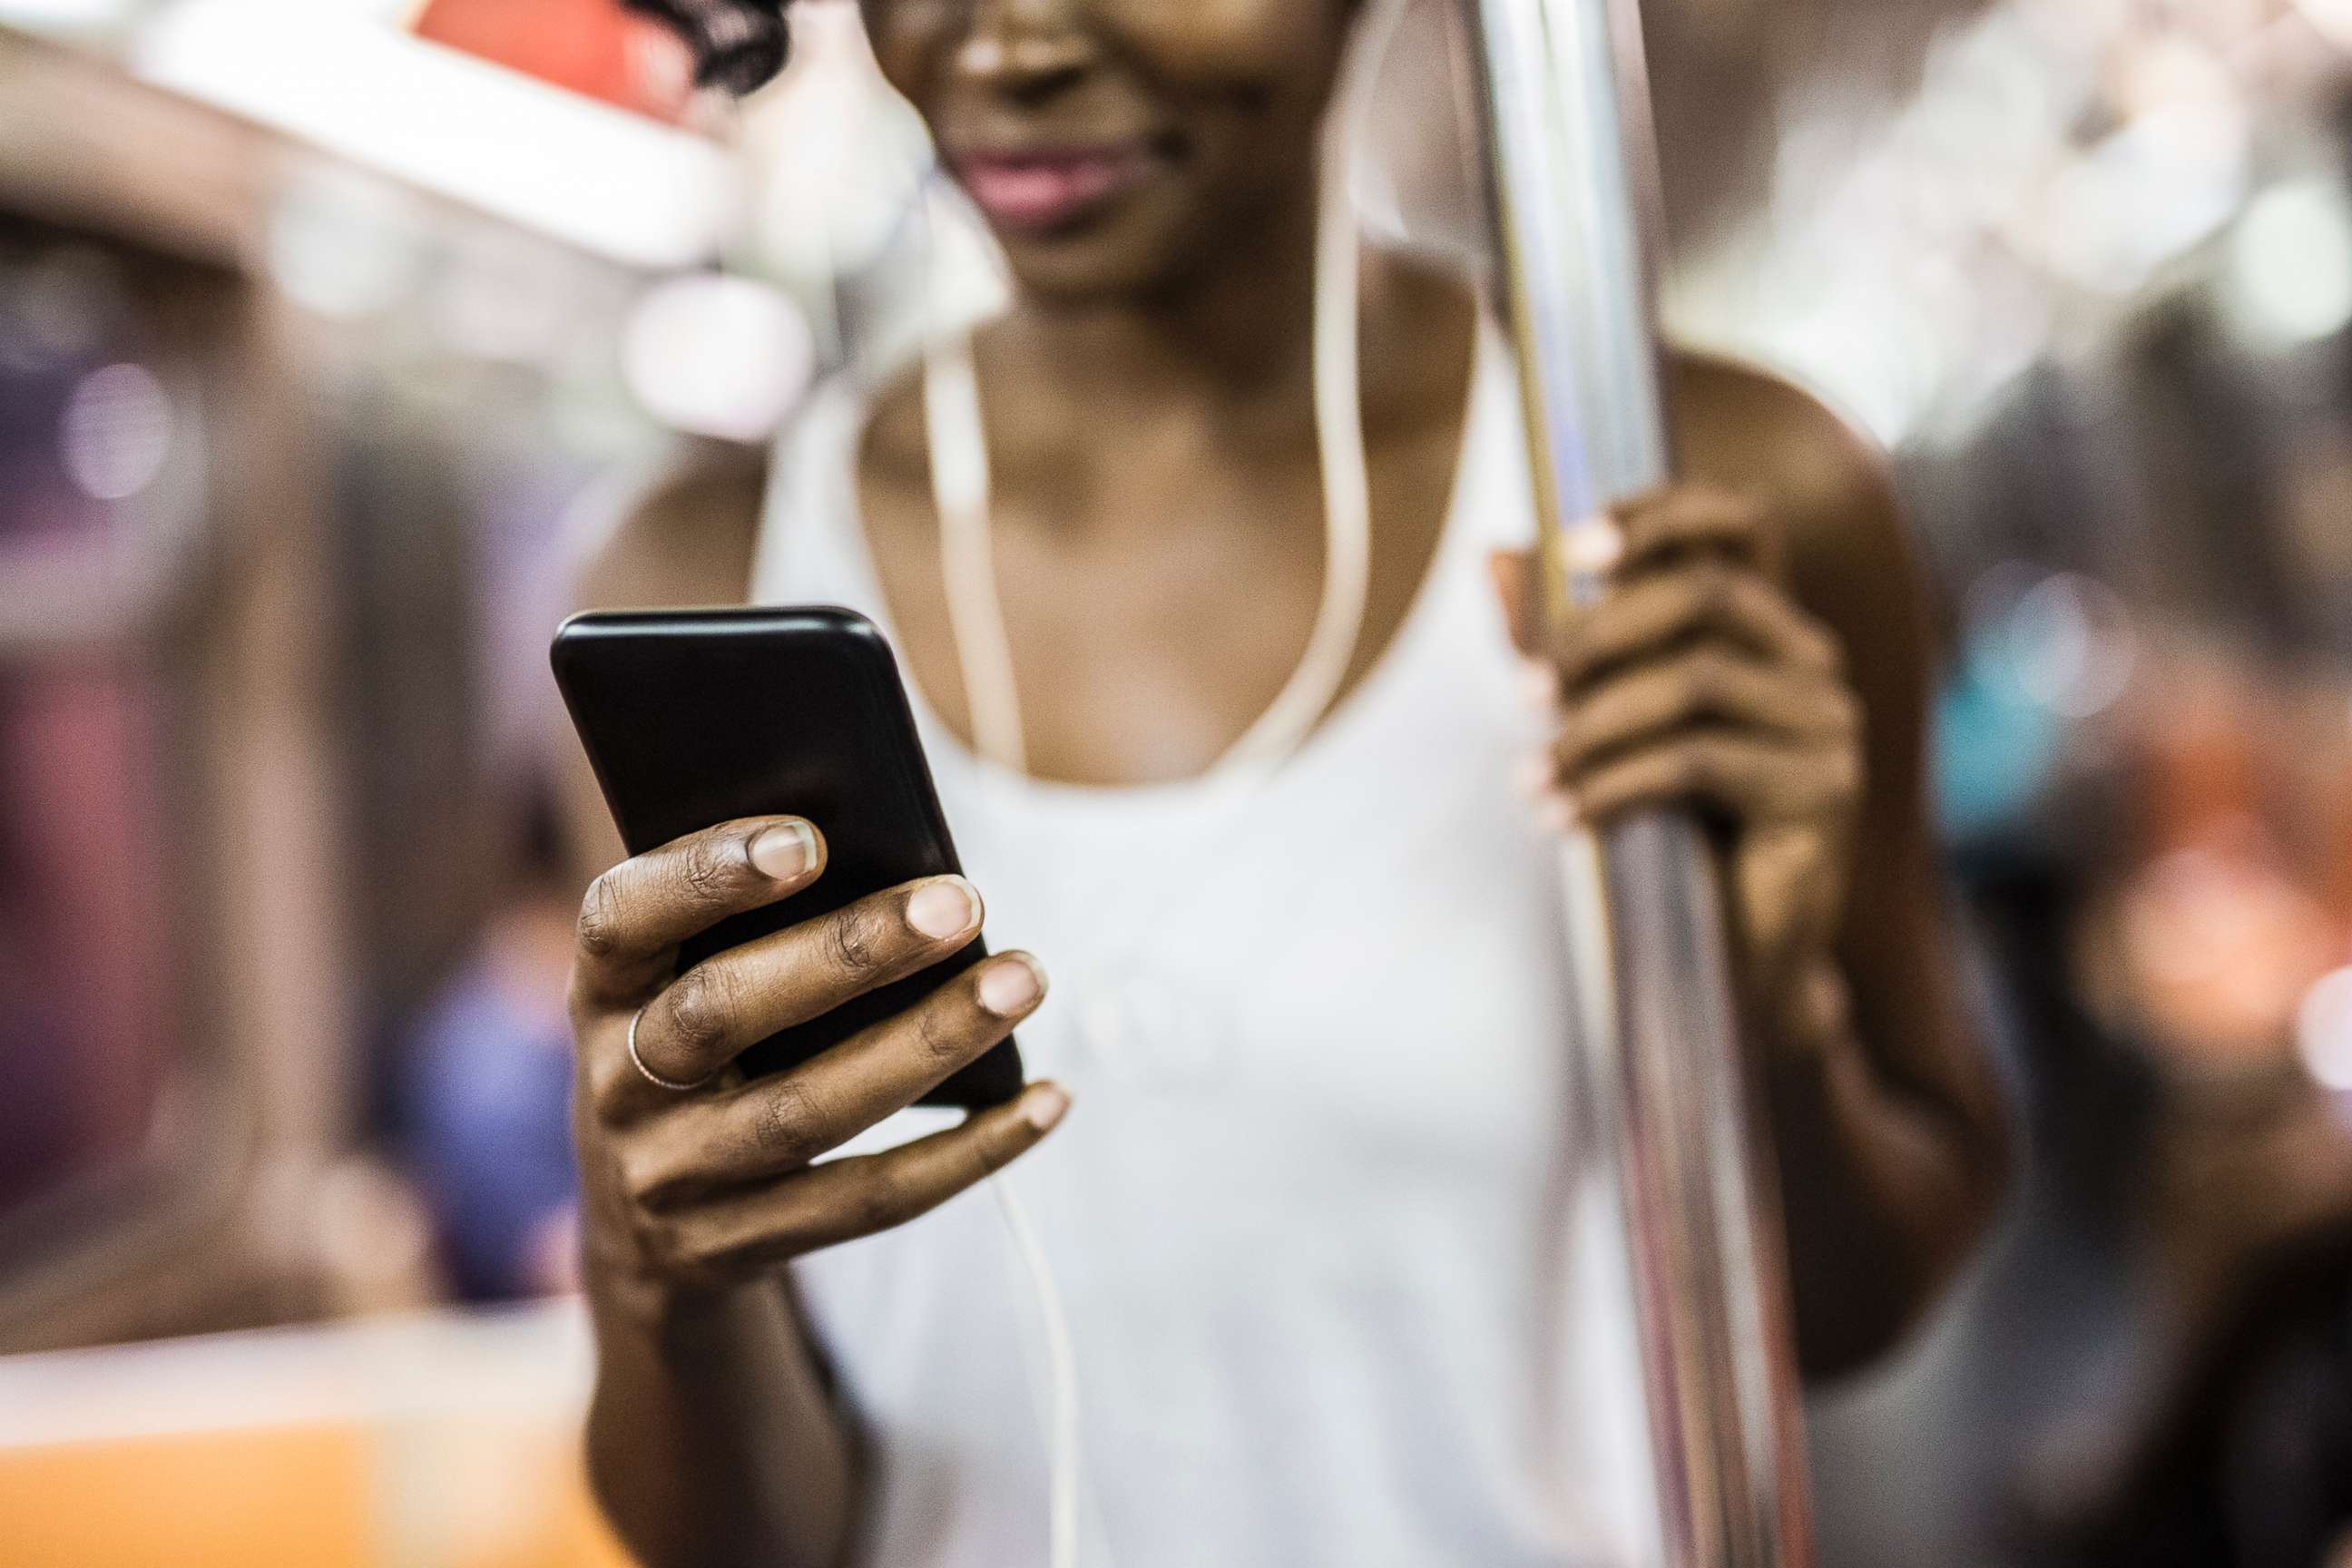 PHOTO: A woman looks at her phone on the train in New York in an undated stock photo.